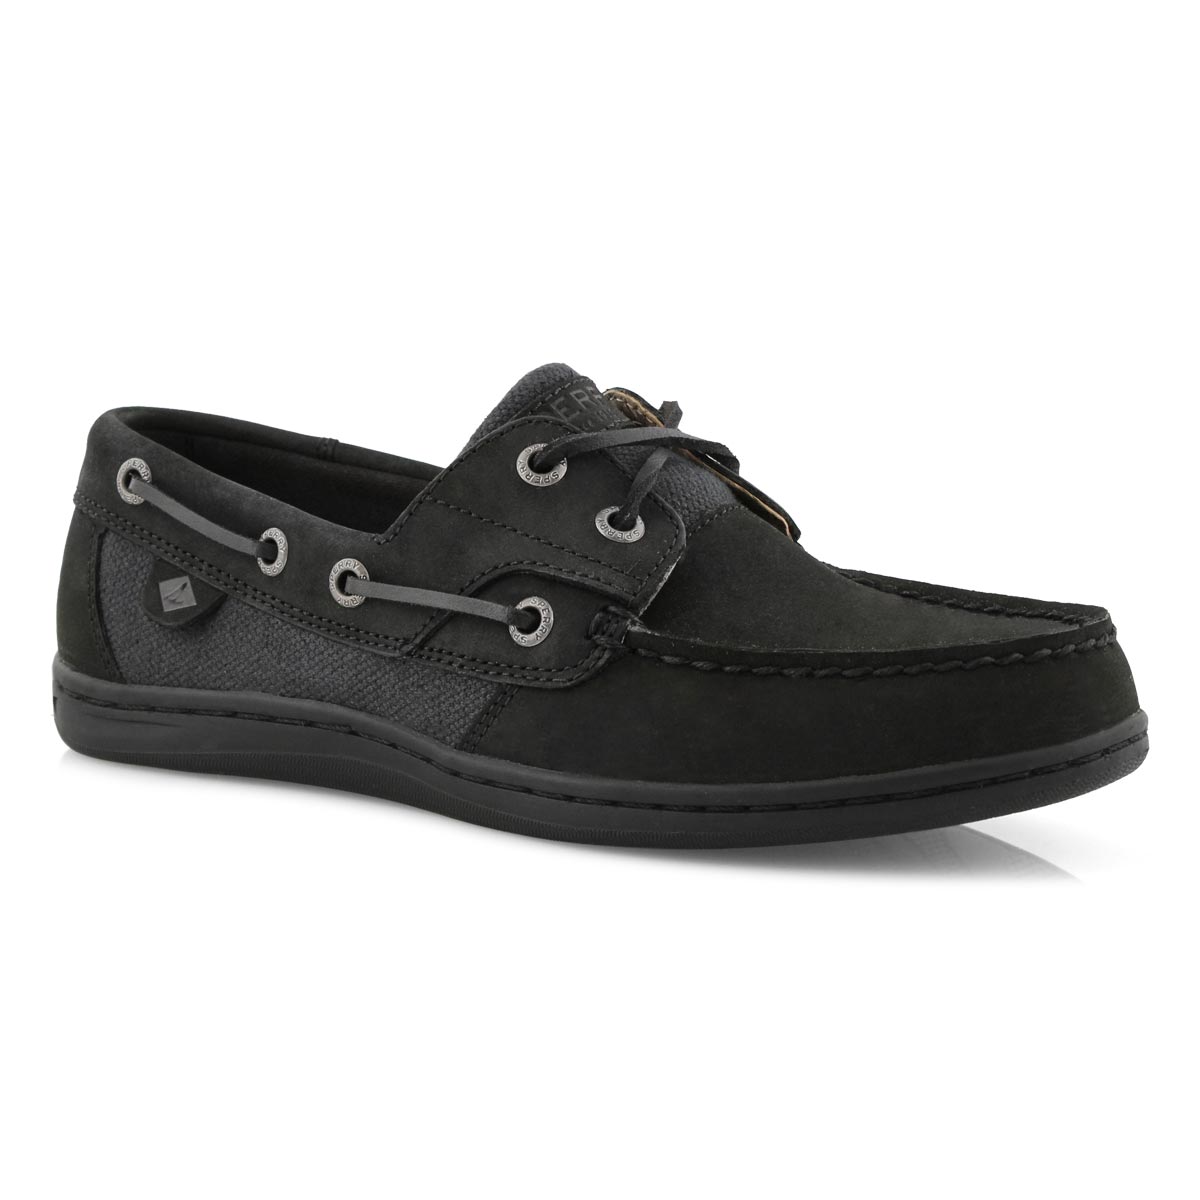 Sperry Women's KOIFISH black boat shoes 